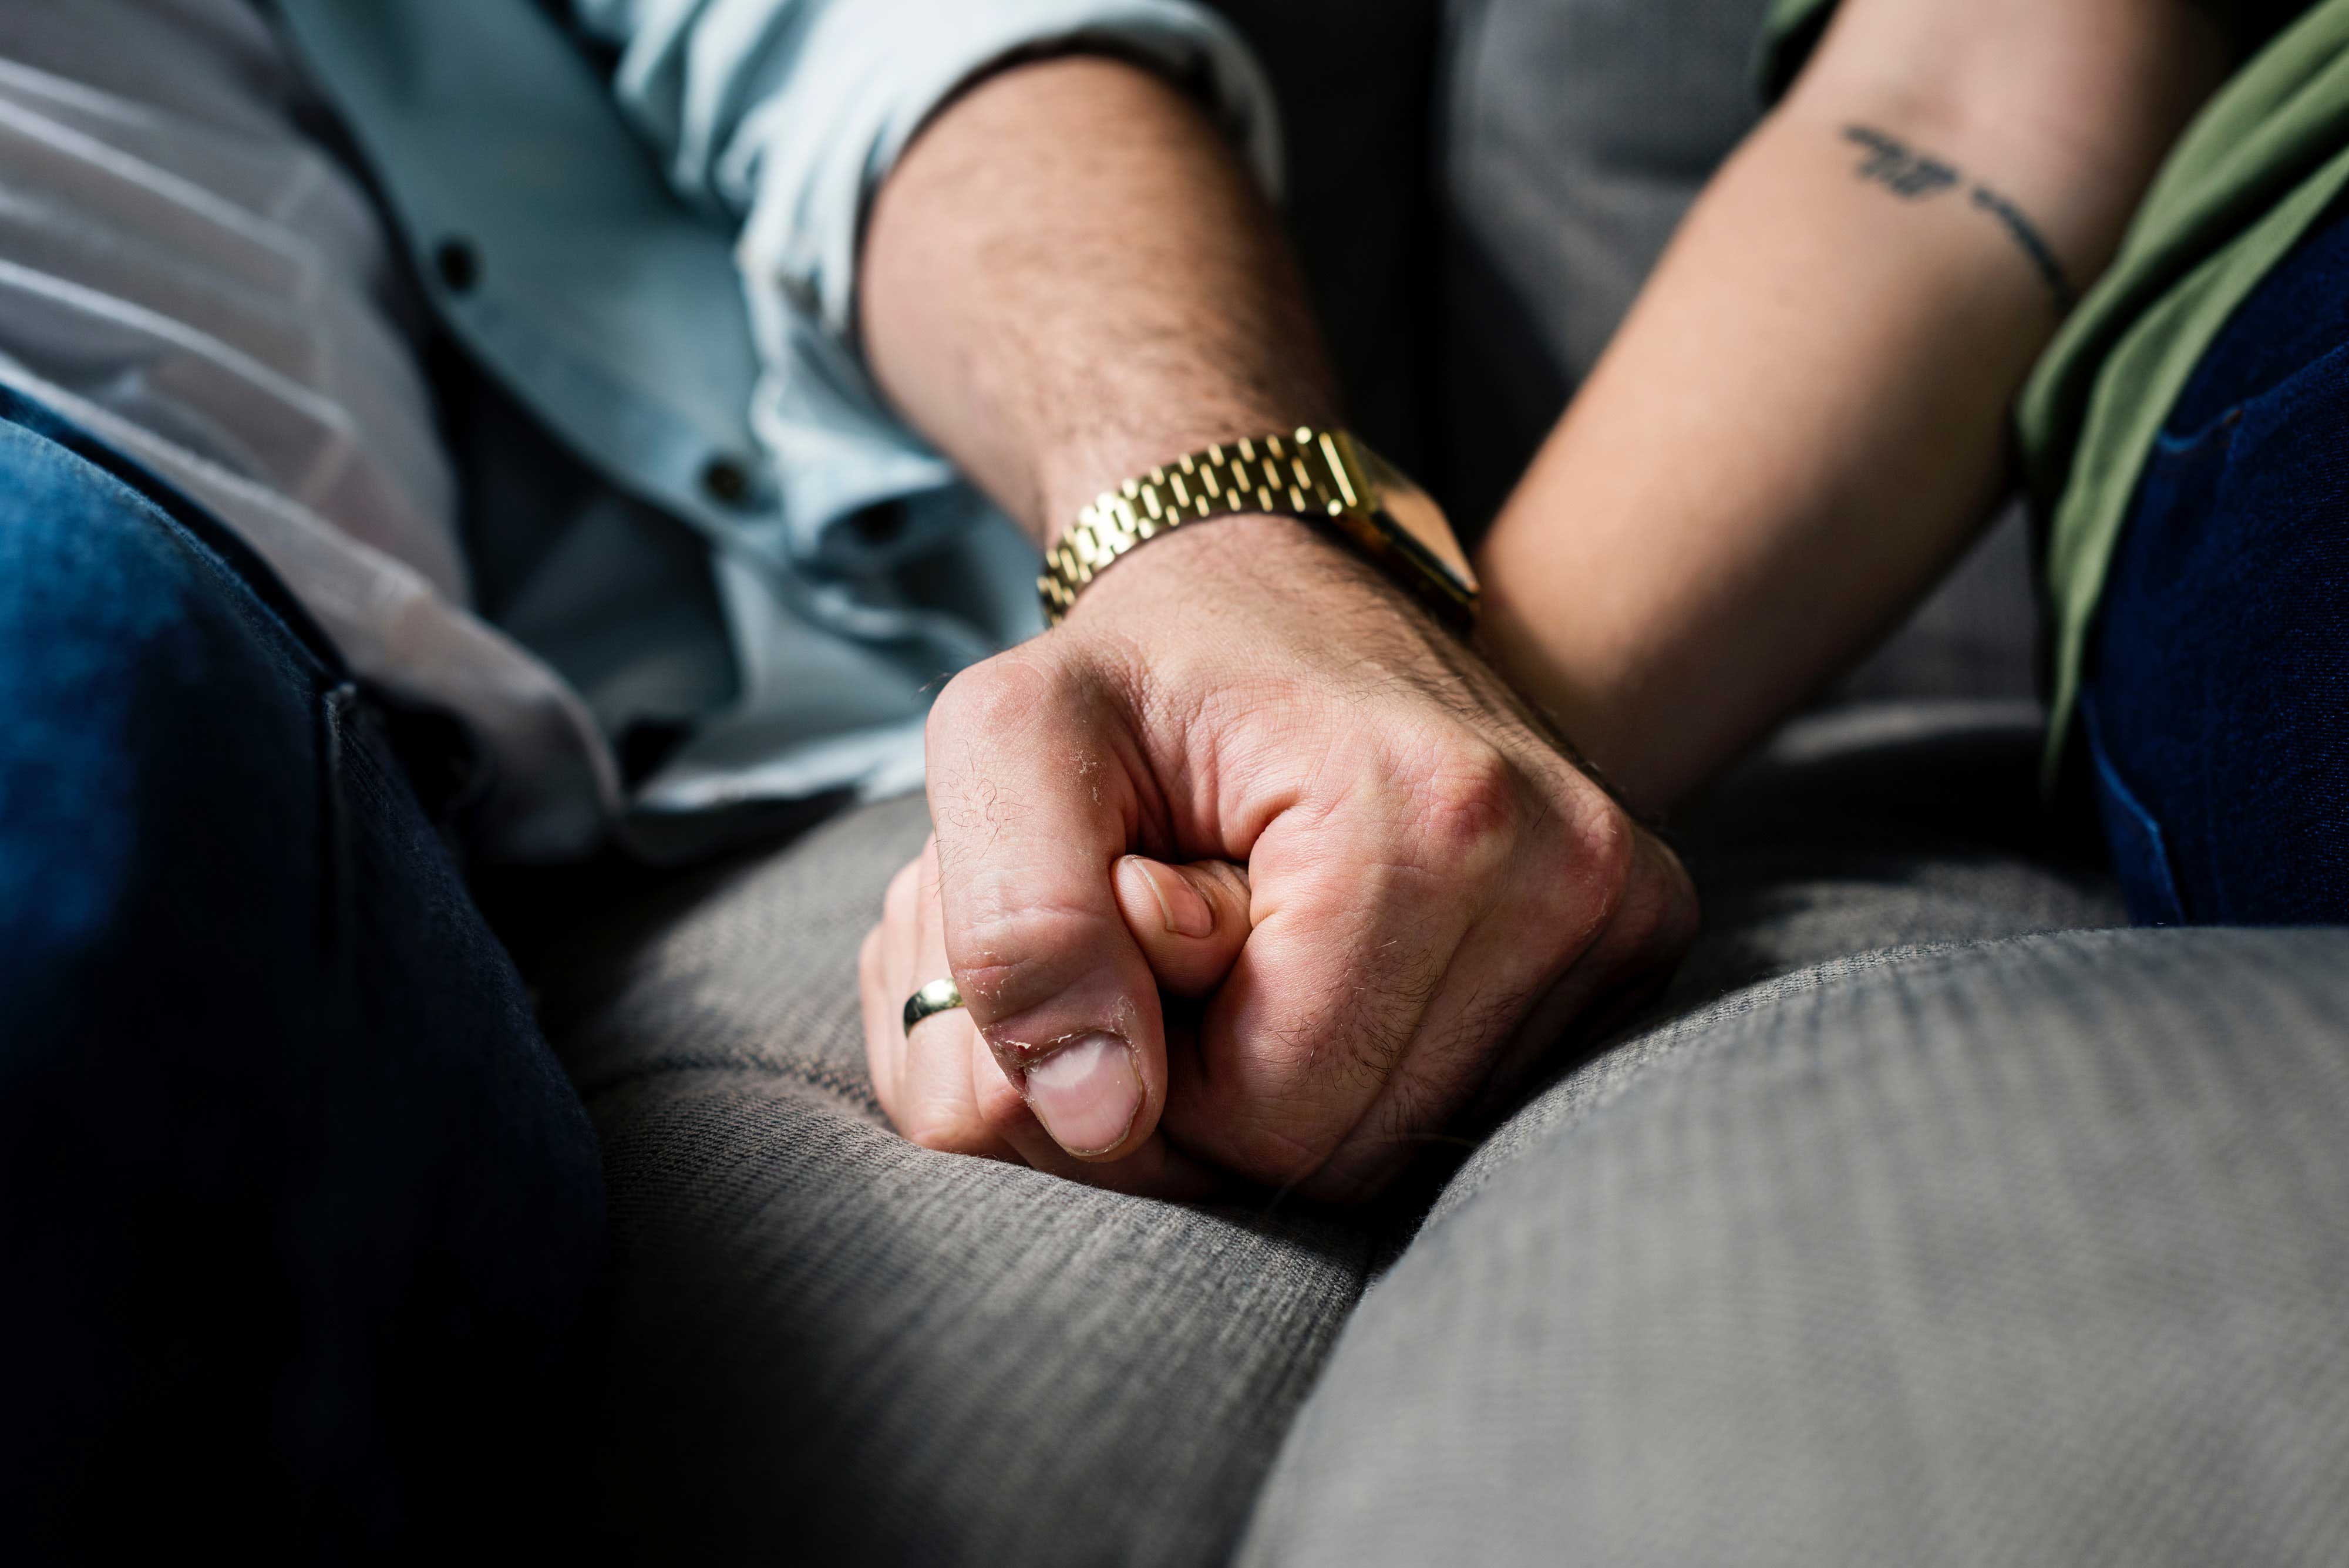 Premarital Counseling: The Most Important Topics to Discuss Before You Get Married